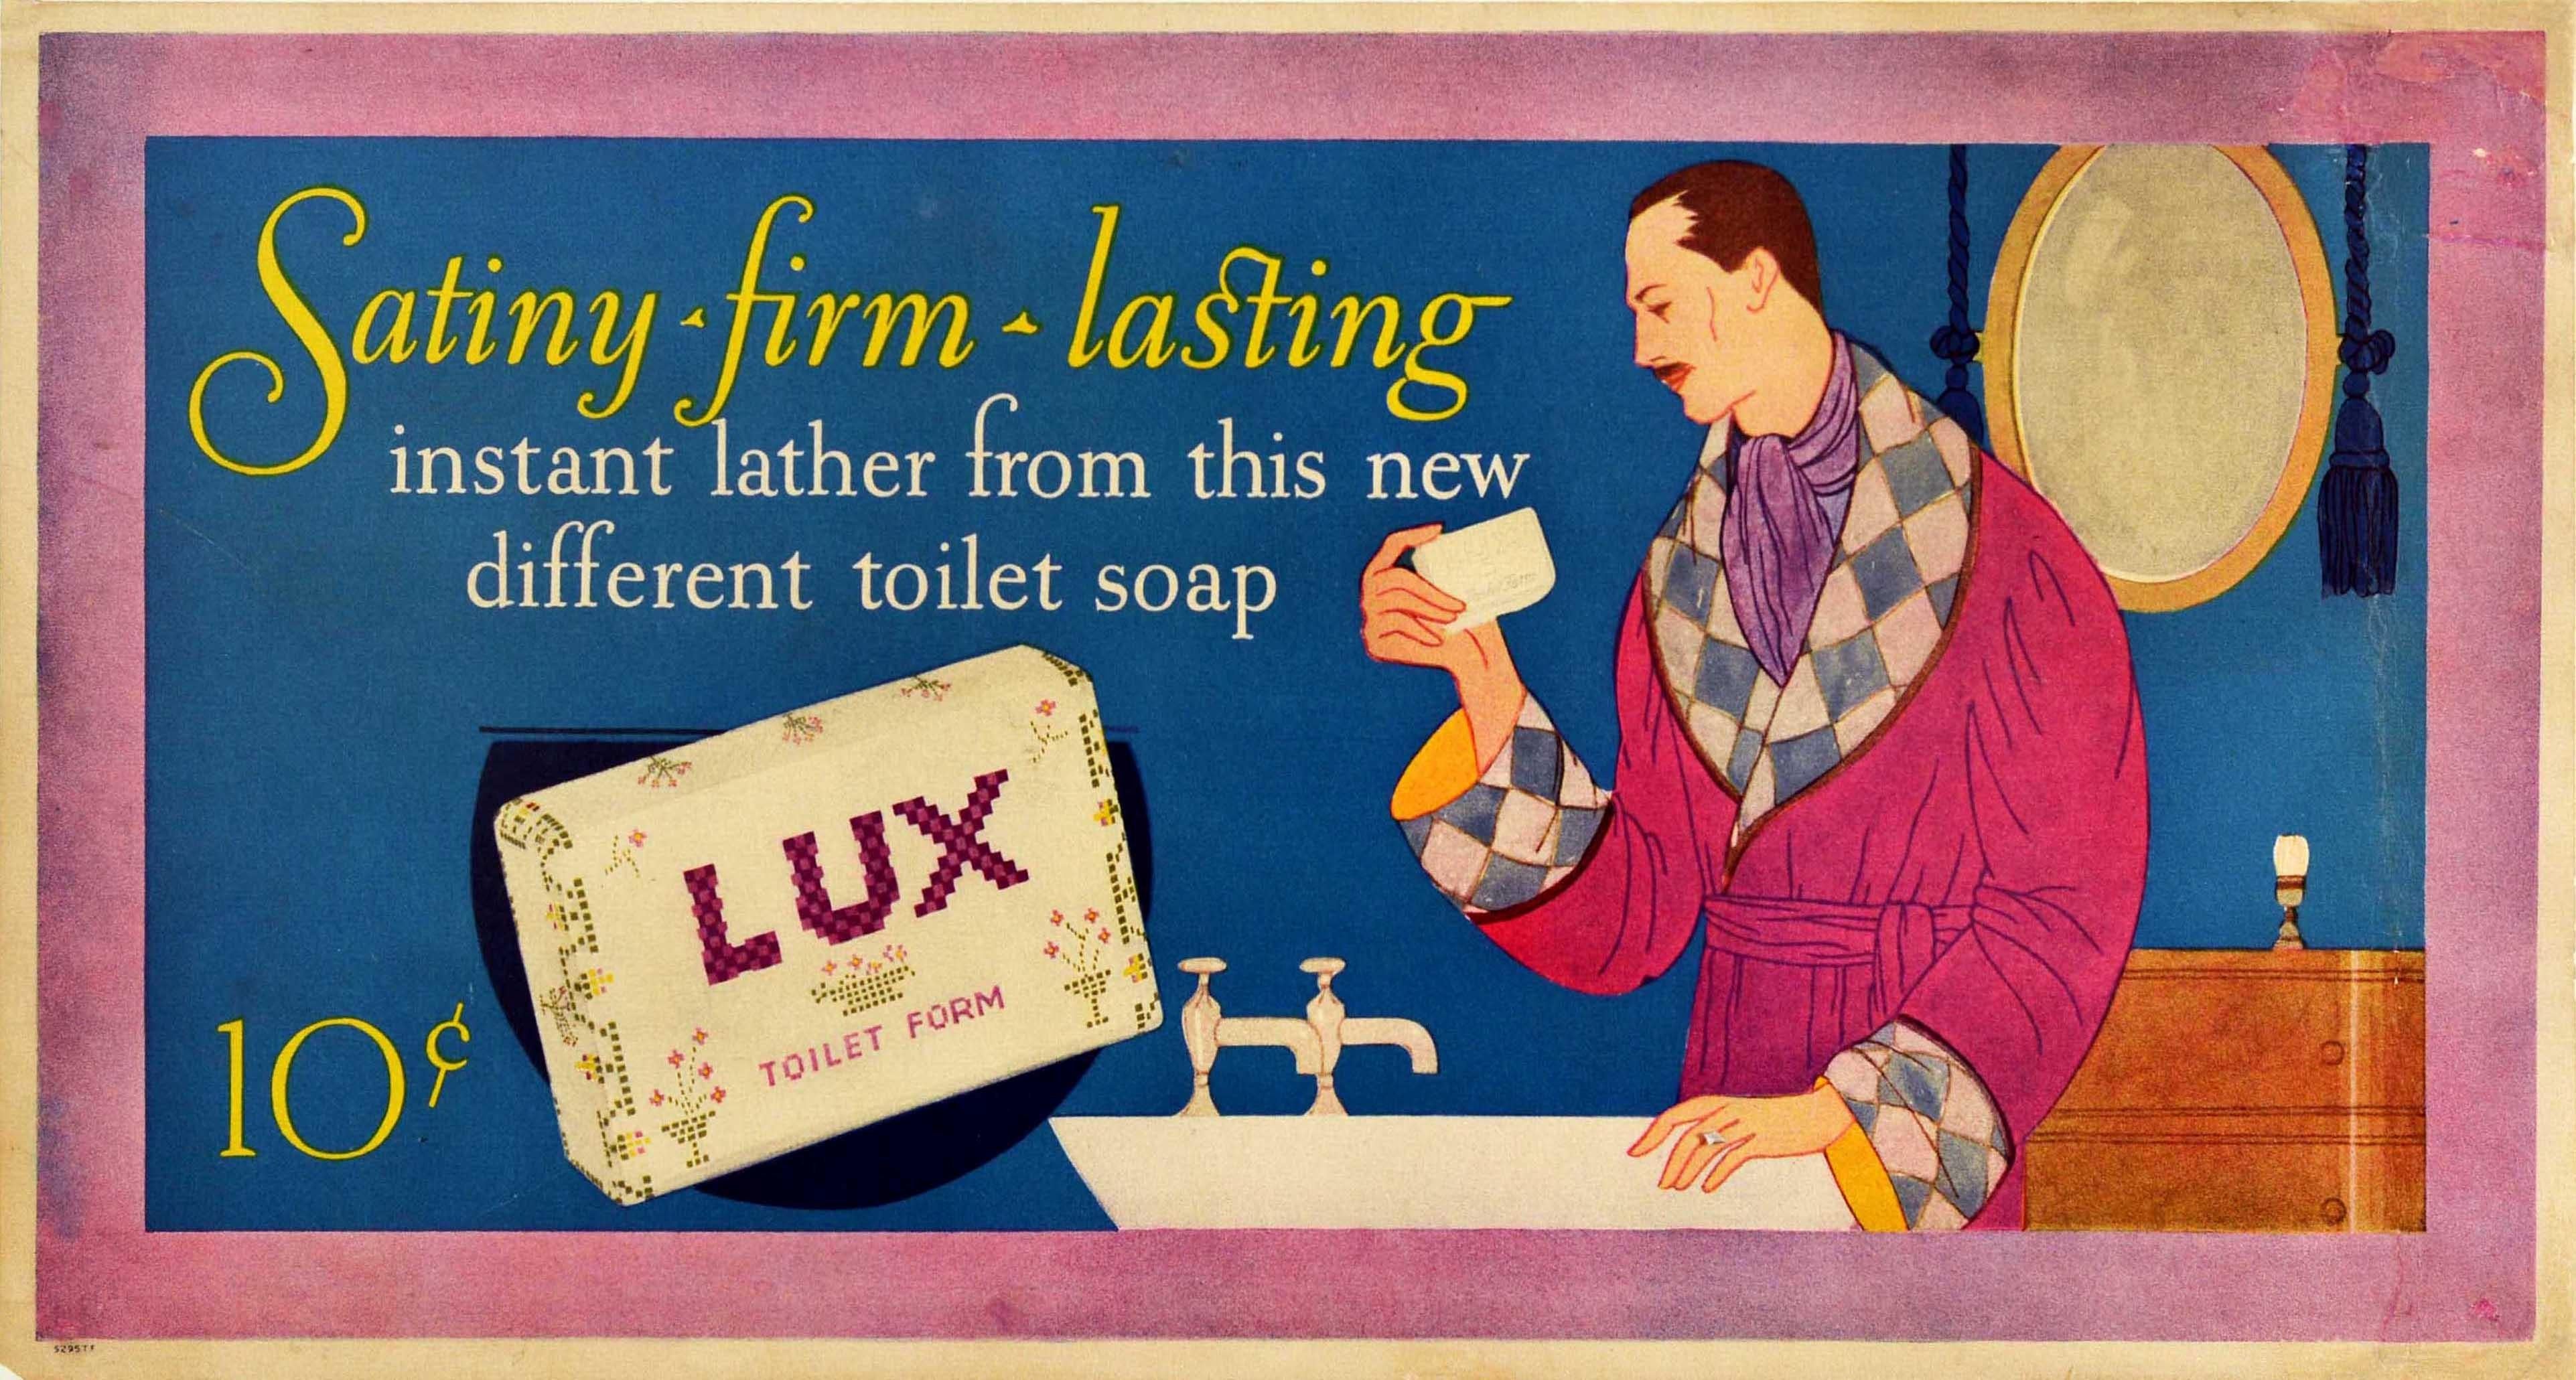 Unknown Print - Original Vintage Poster Lux Toilet Soap Wellness Advertising Art Lasting Lather